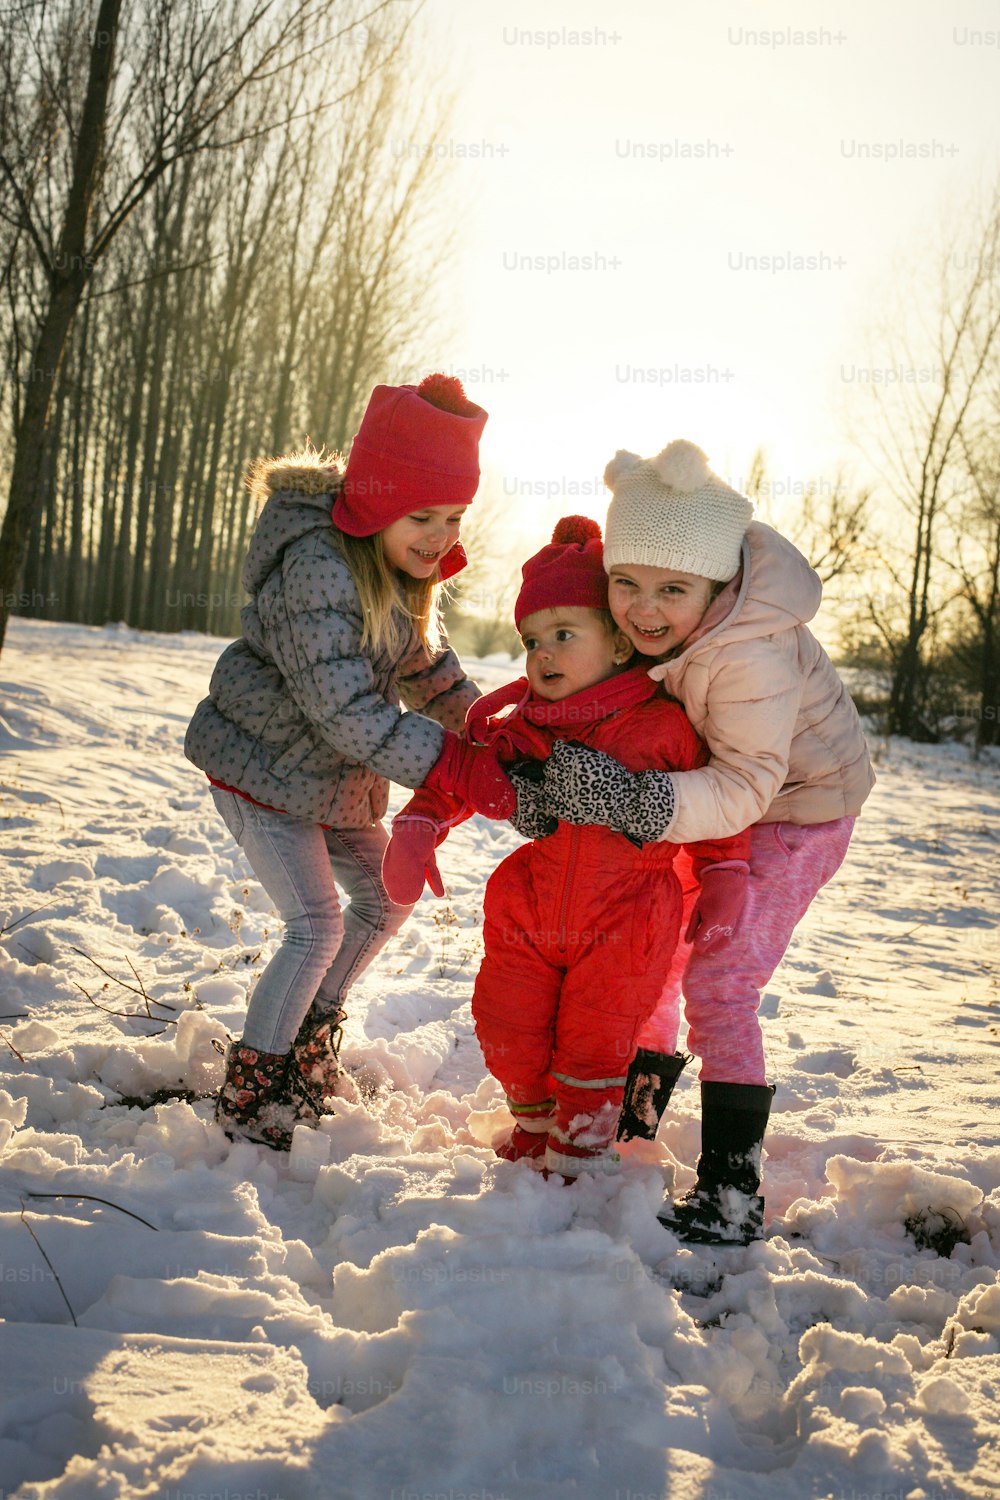 Children playing outdoor in the snow.